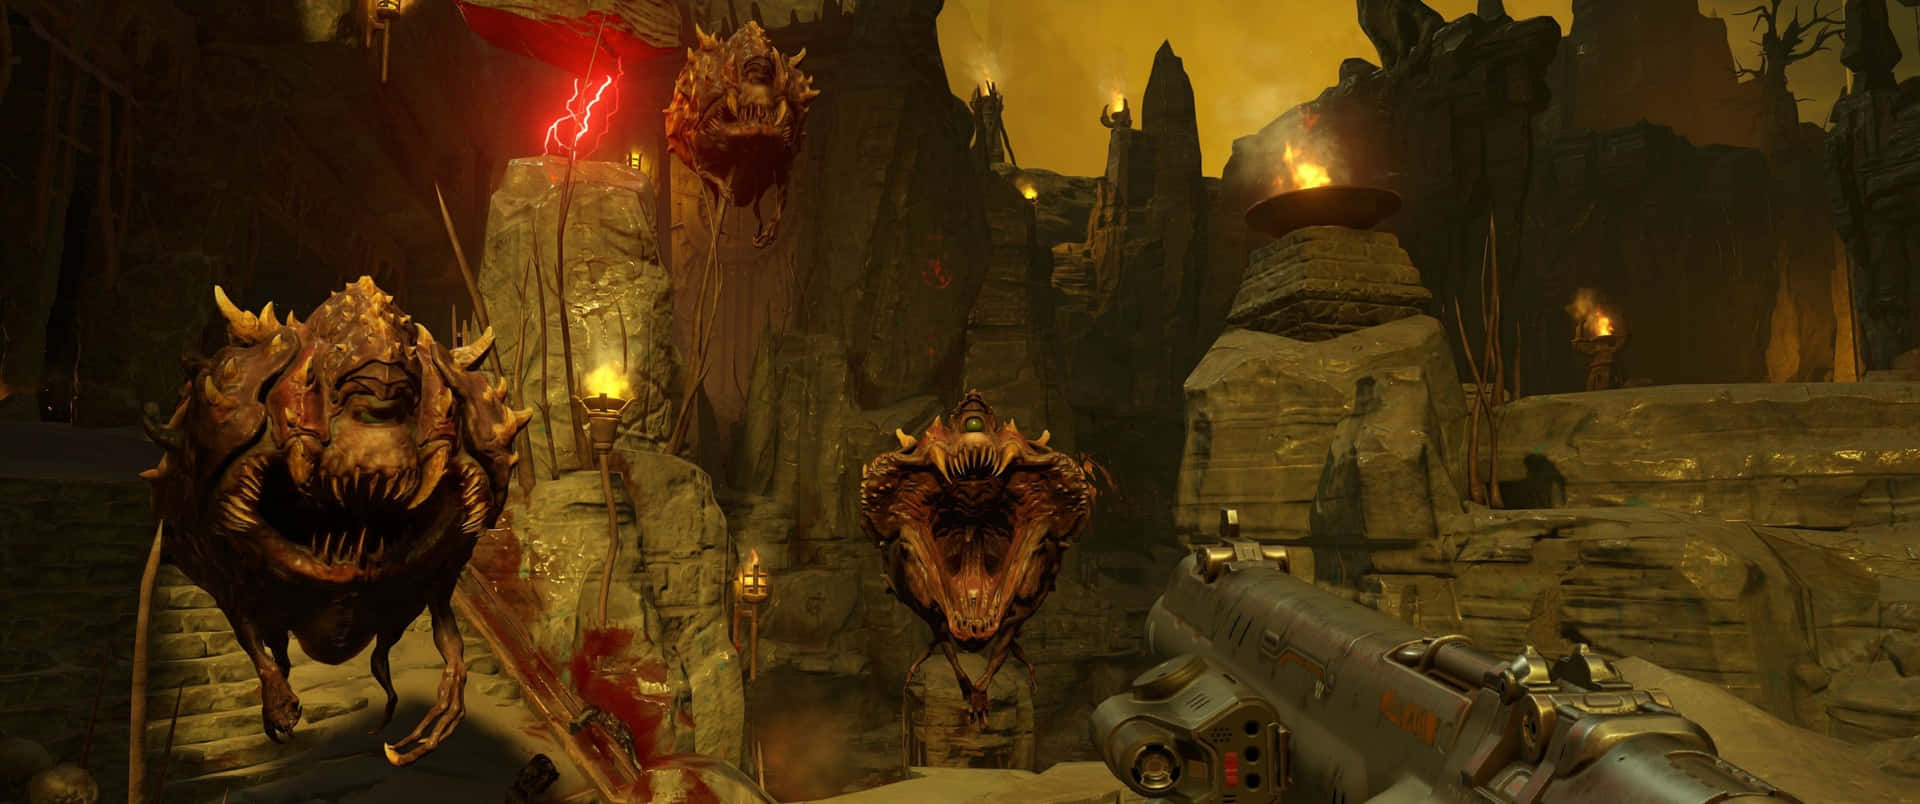 Experience Doom in its full glory with a 3440x1440p display